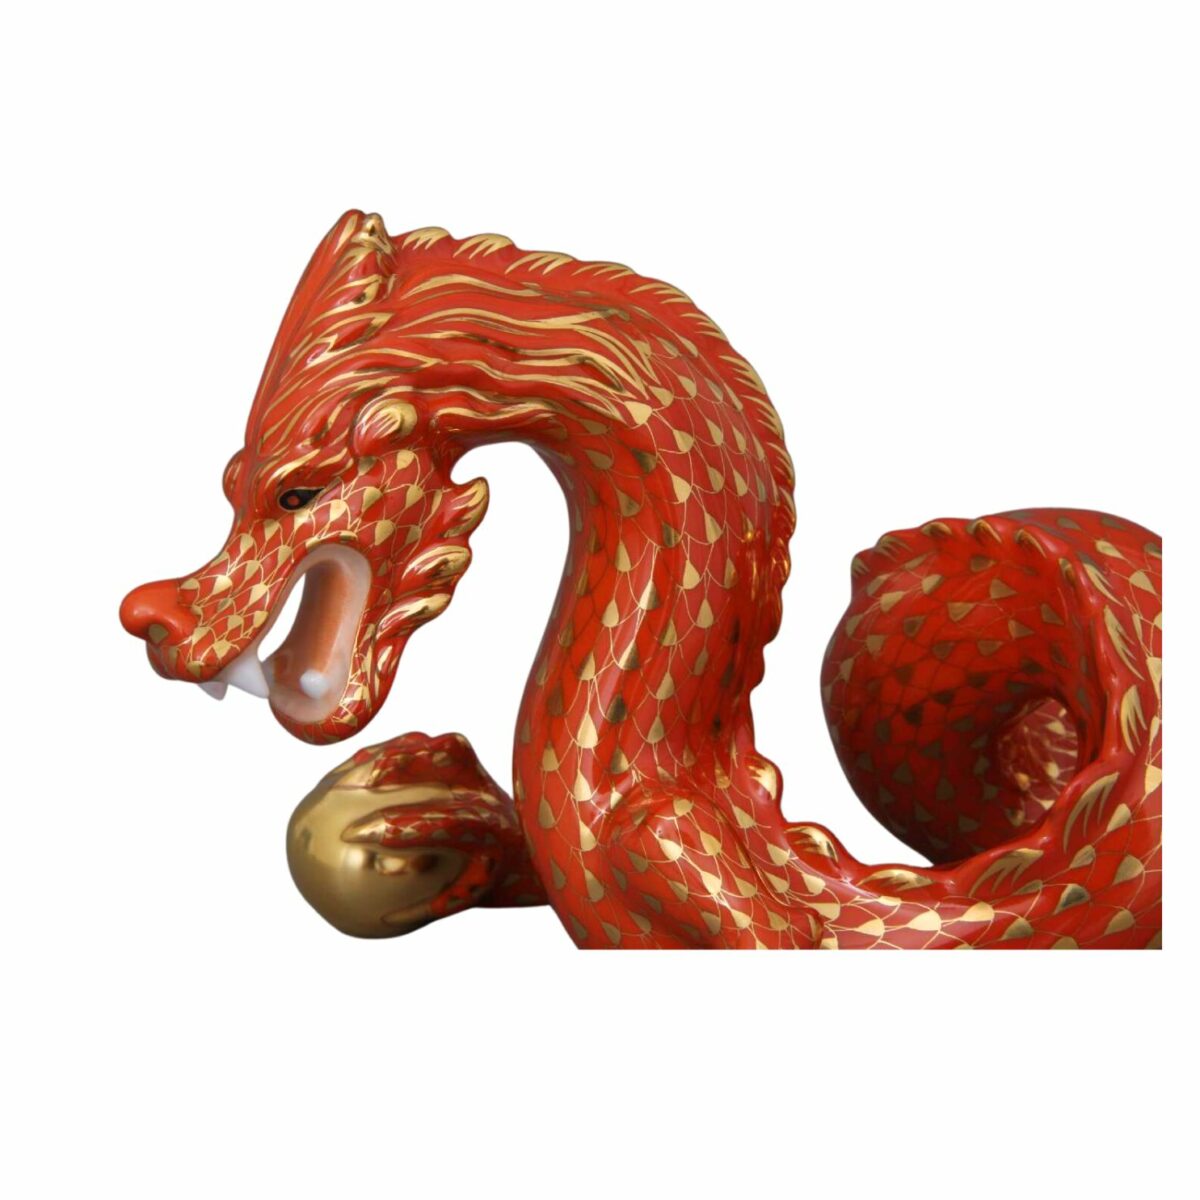 Herend-Dragon-Large-Figurine-Fishnet-Rust-Gold15601-0-00 VH-OR11